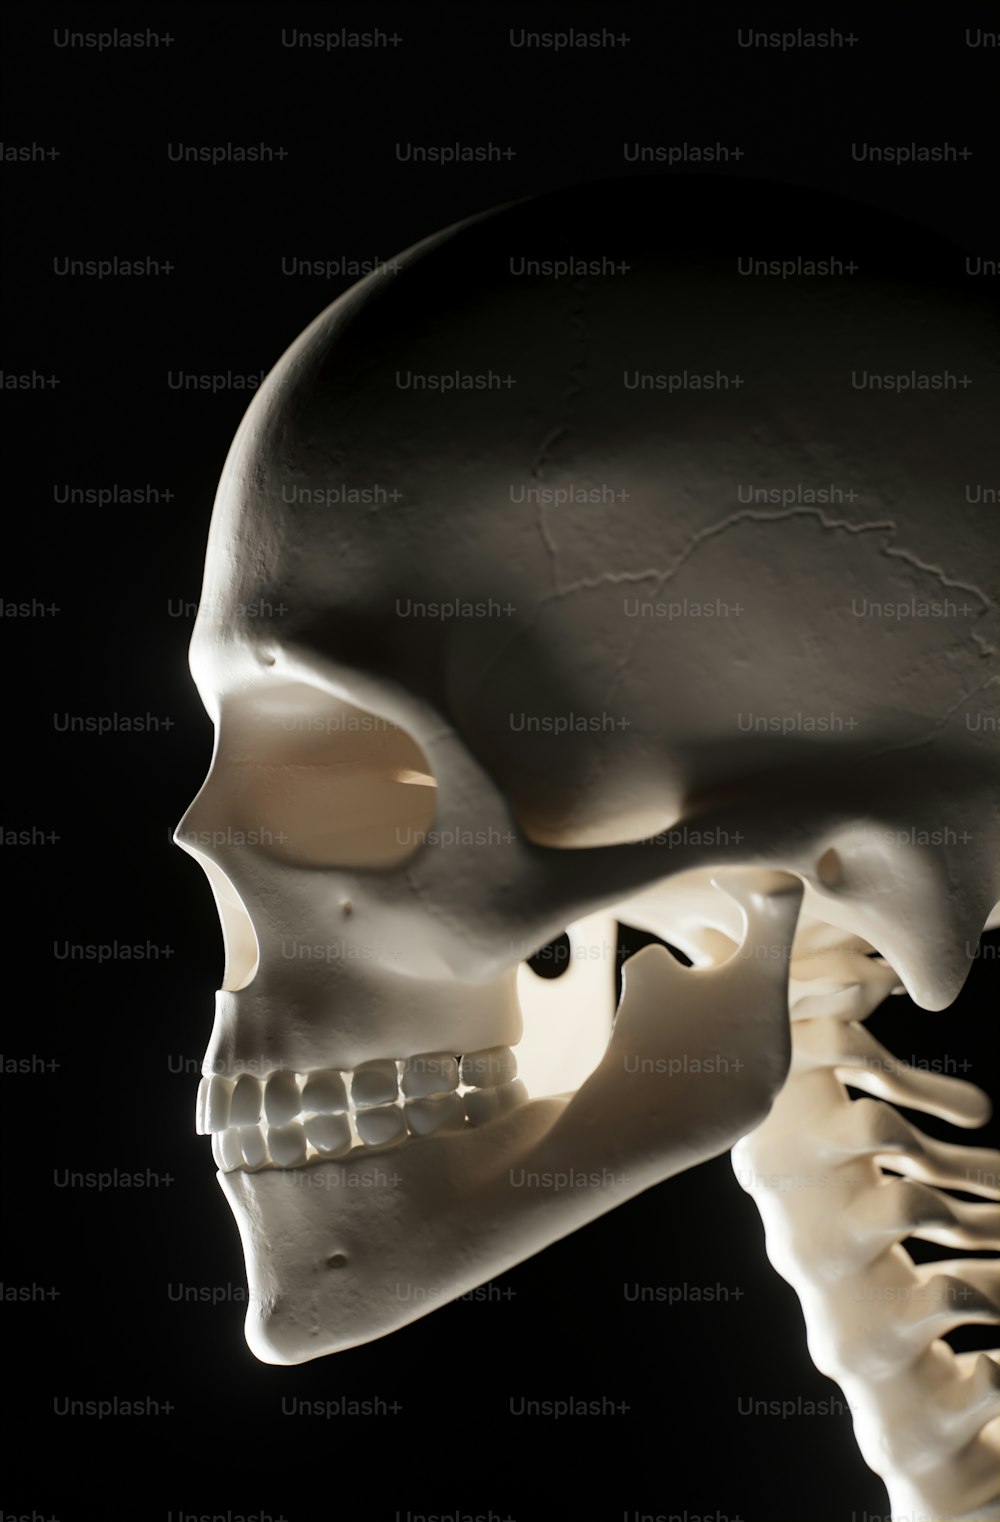 a model of a human skull with a lower jaw and lower jaw